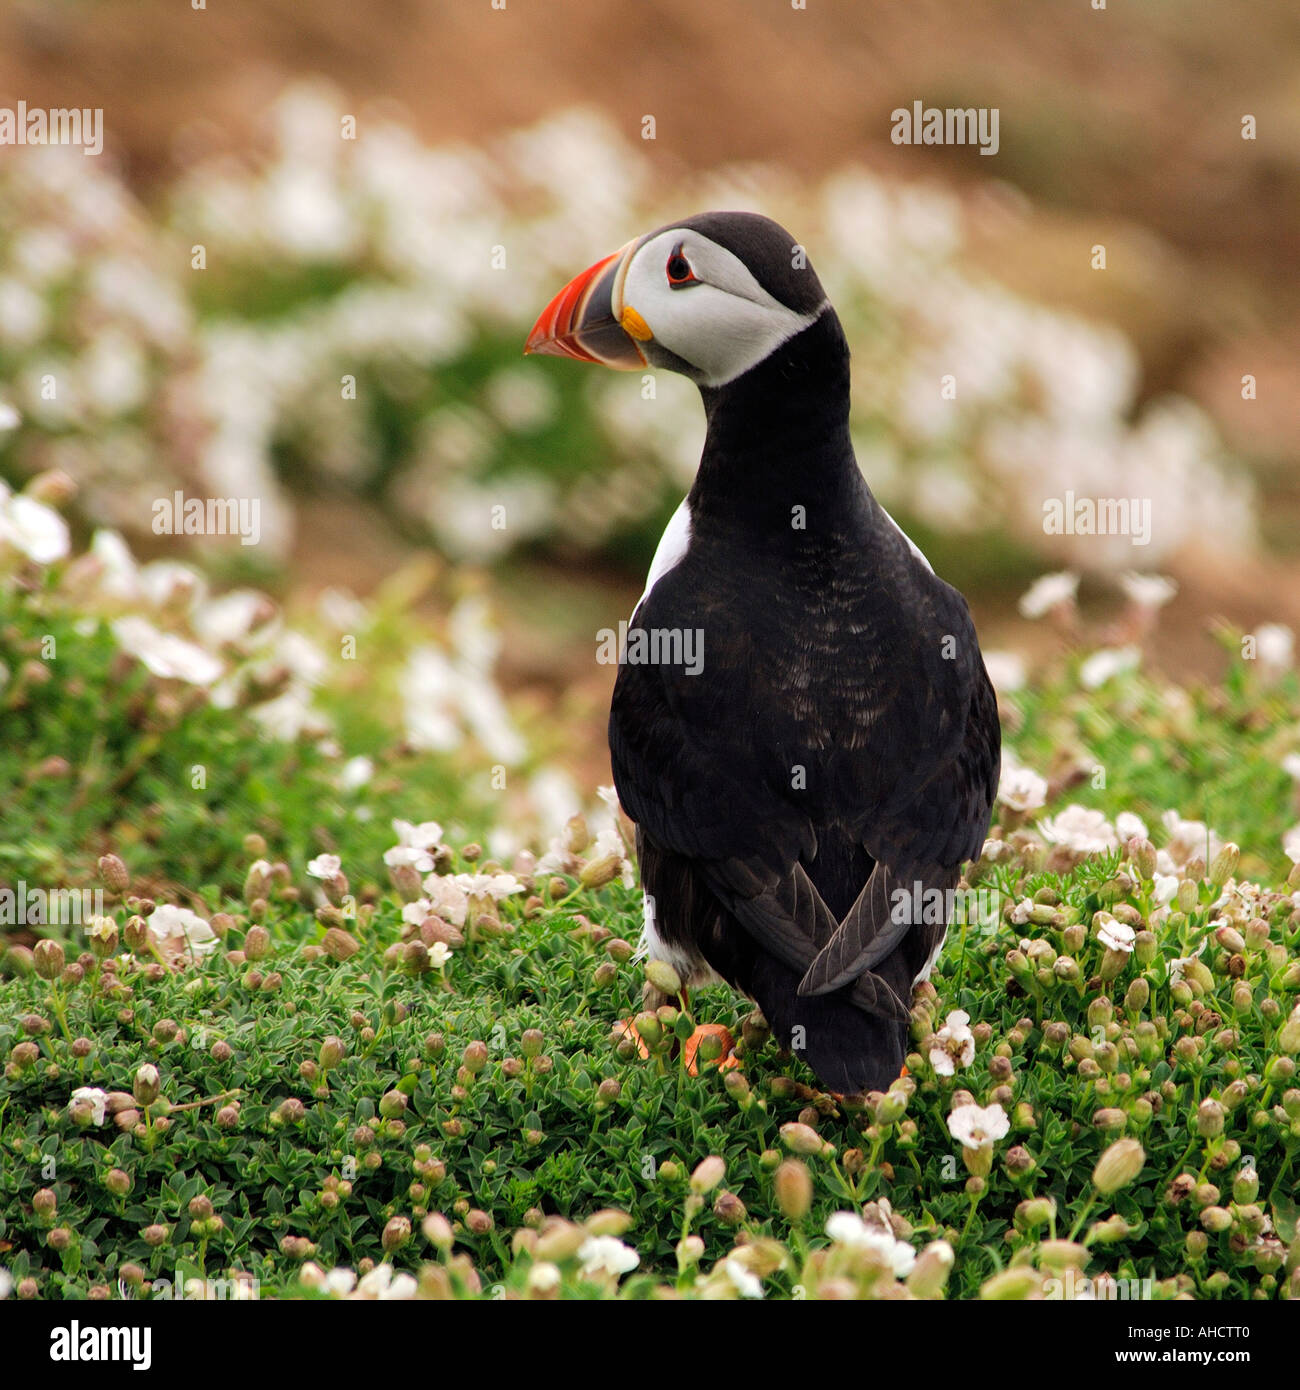 Close up and detailed image single Atlantic Puffin Fratercula arctica standing on grass surrounded by white spring flowers Stock Photo